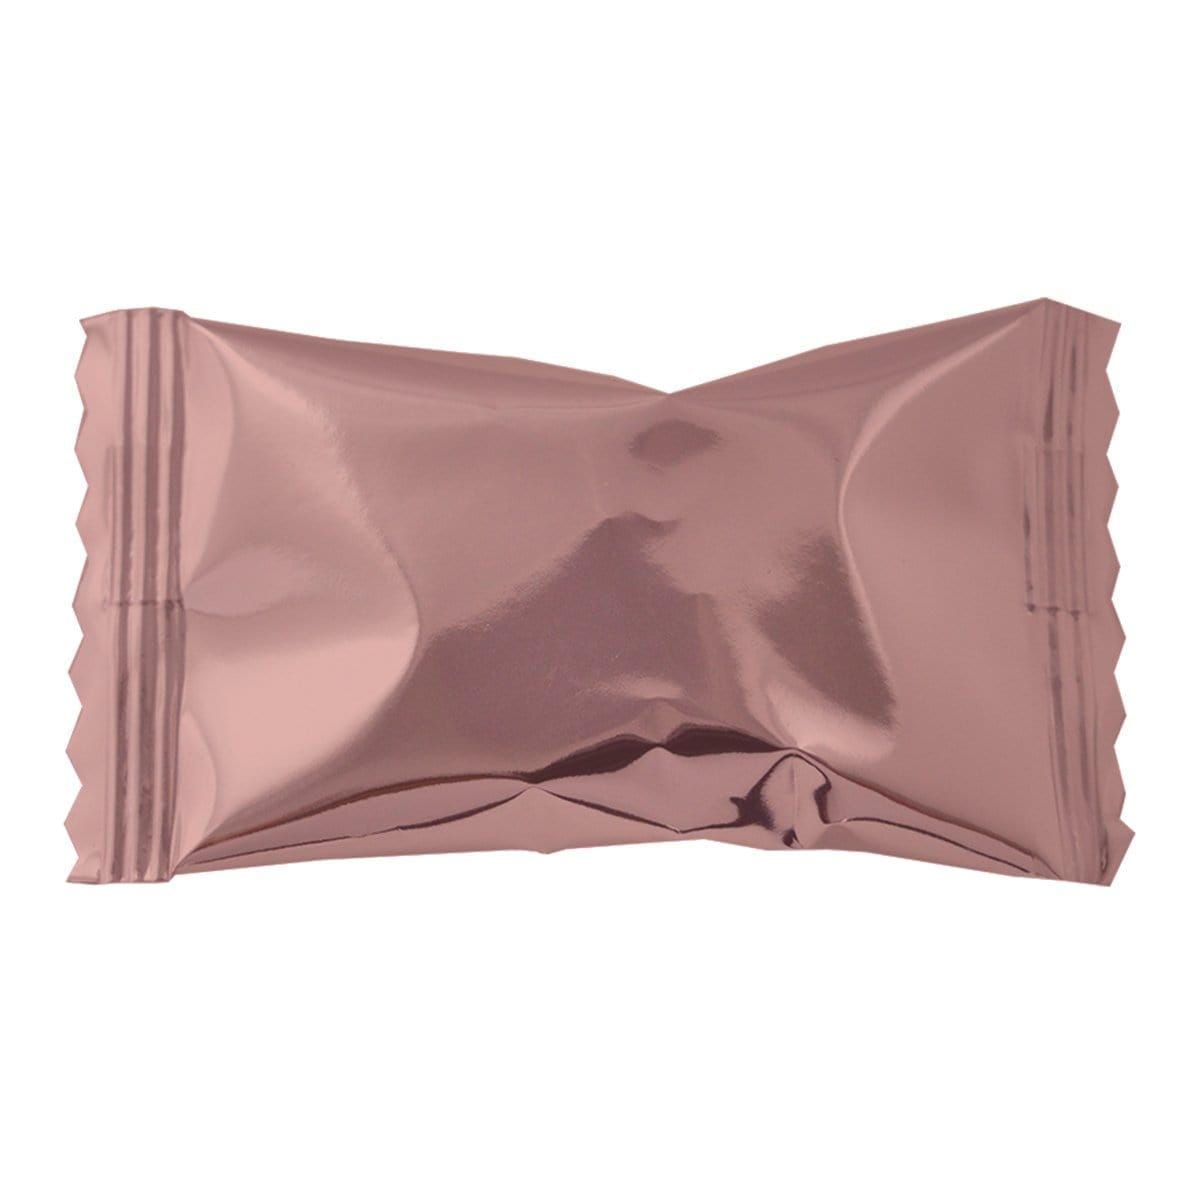 Buy Candy 7oz Buttermints Rose Gold sold at Party Expert